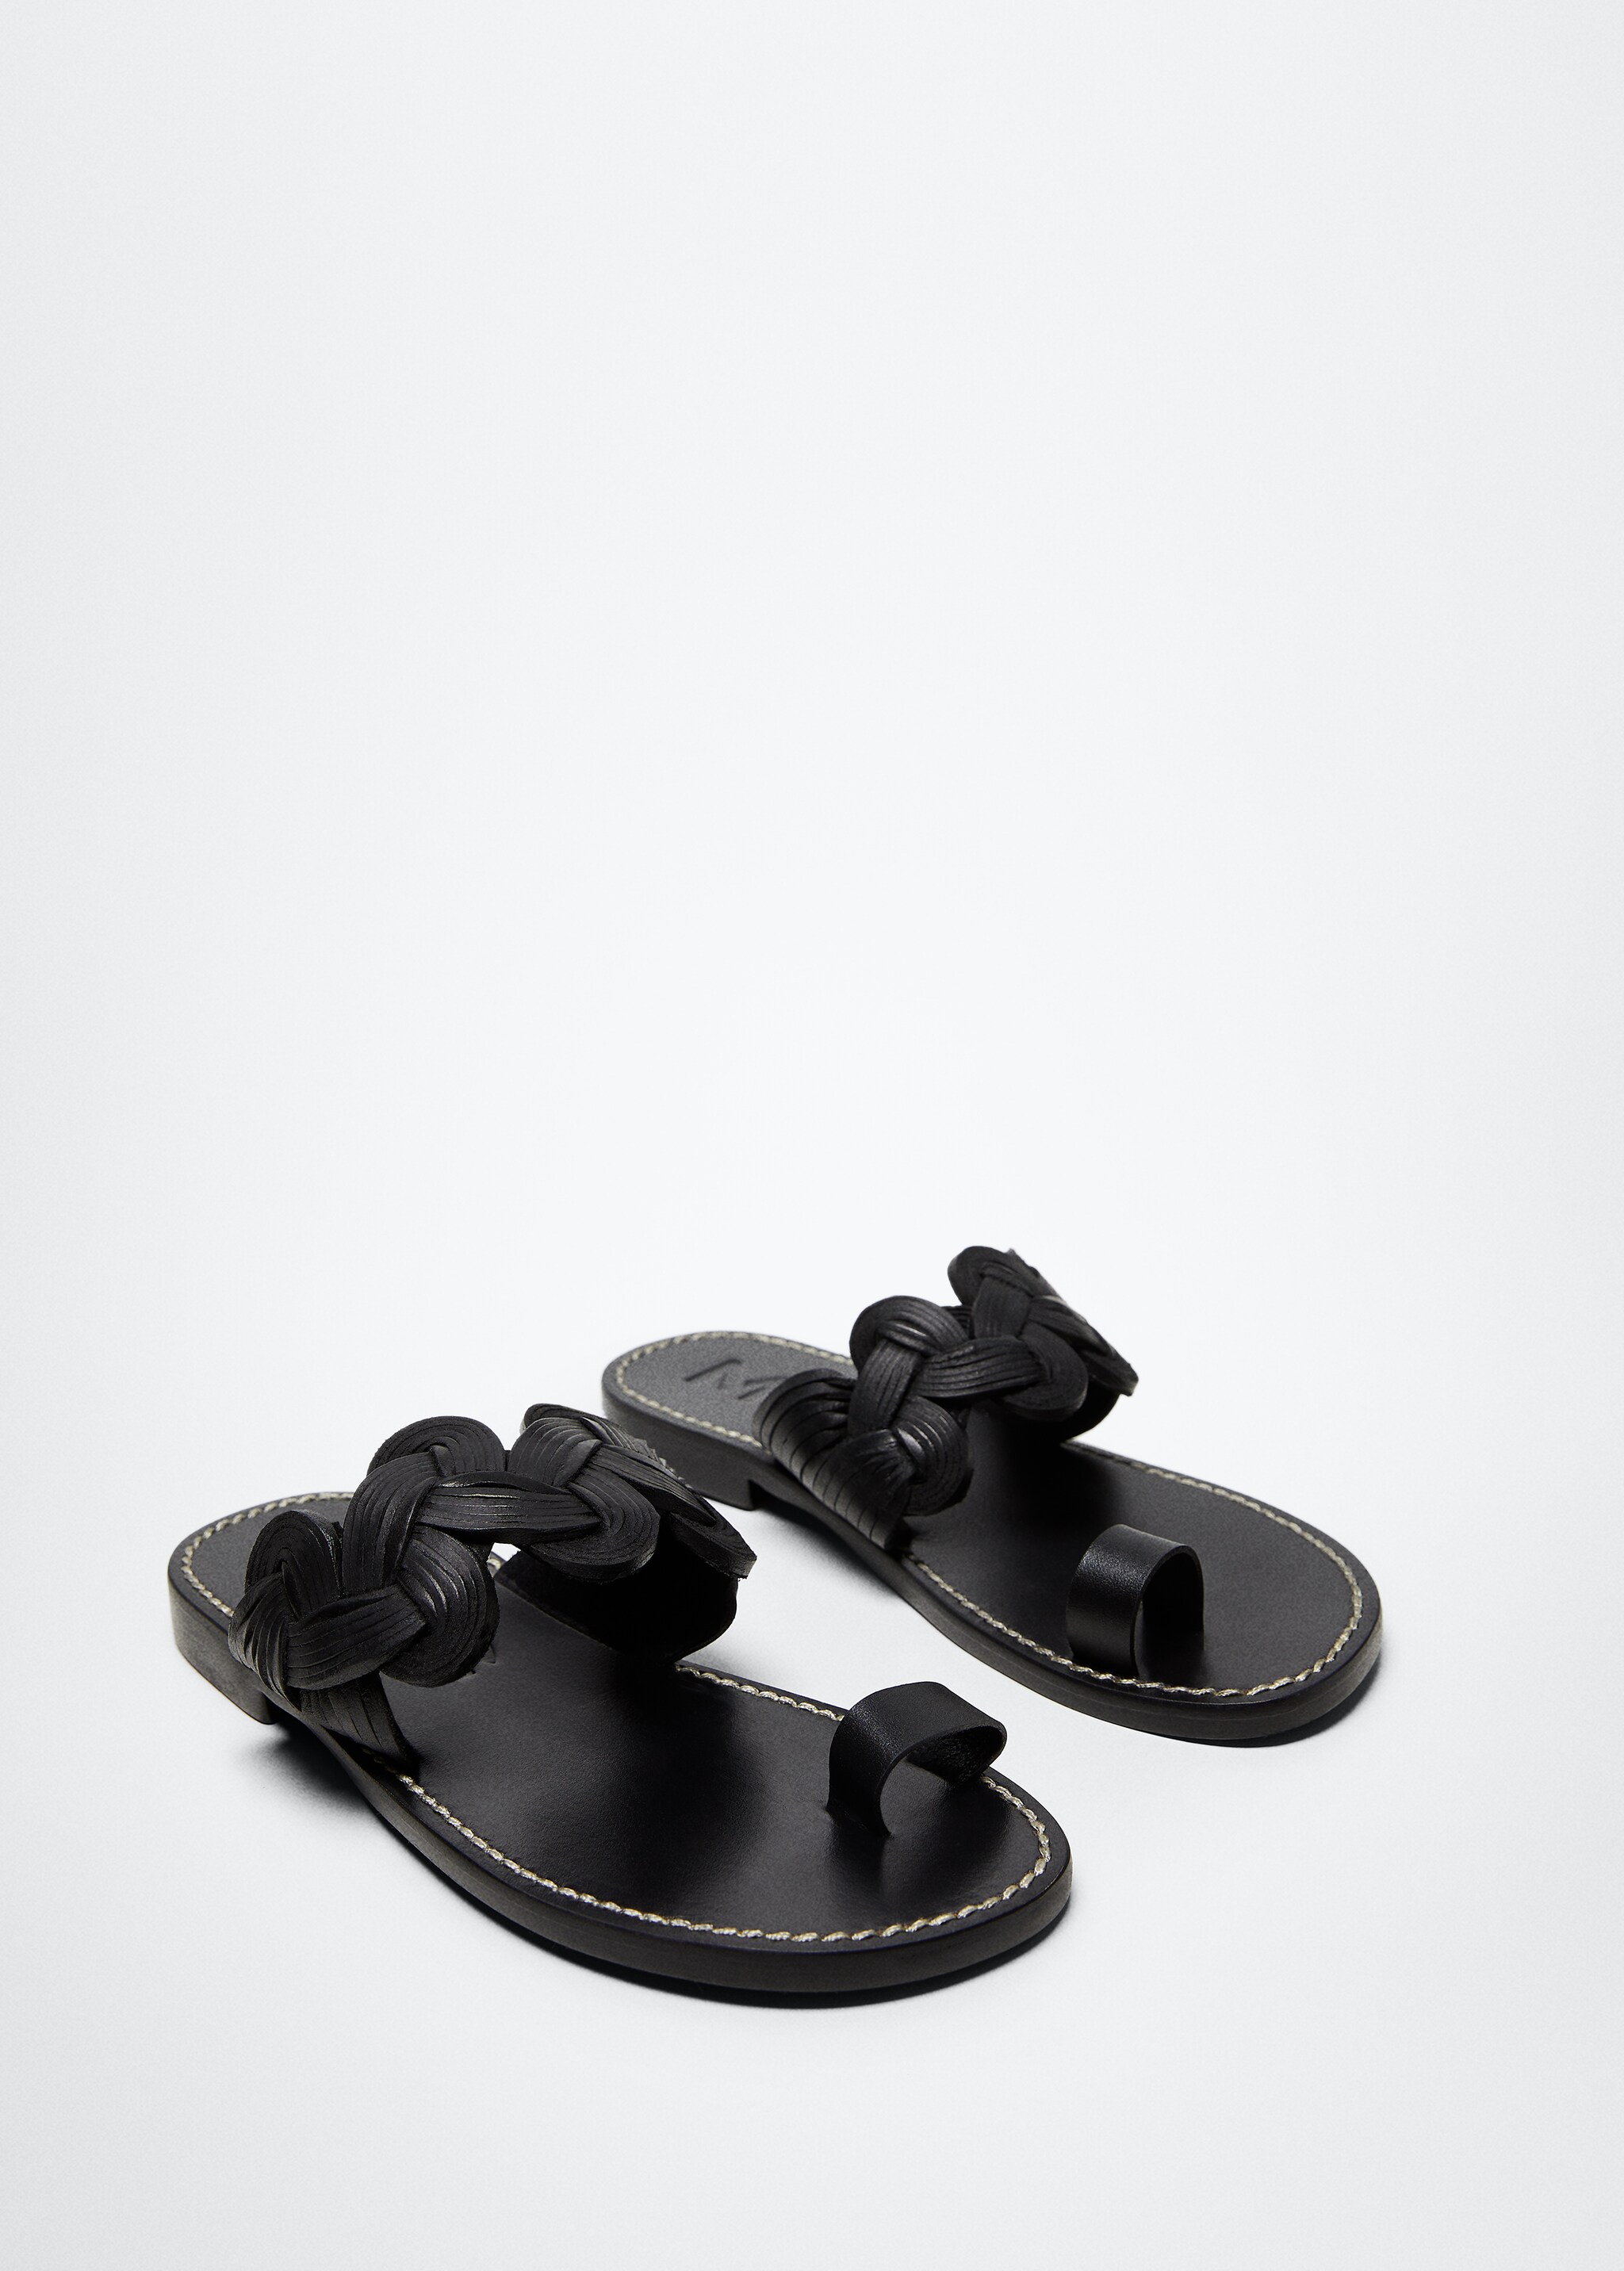 Leather braided sandals - Details of the article 3